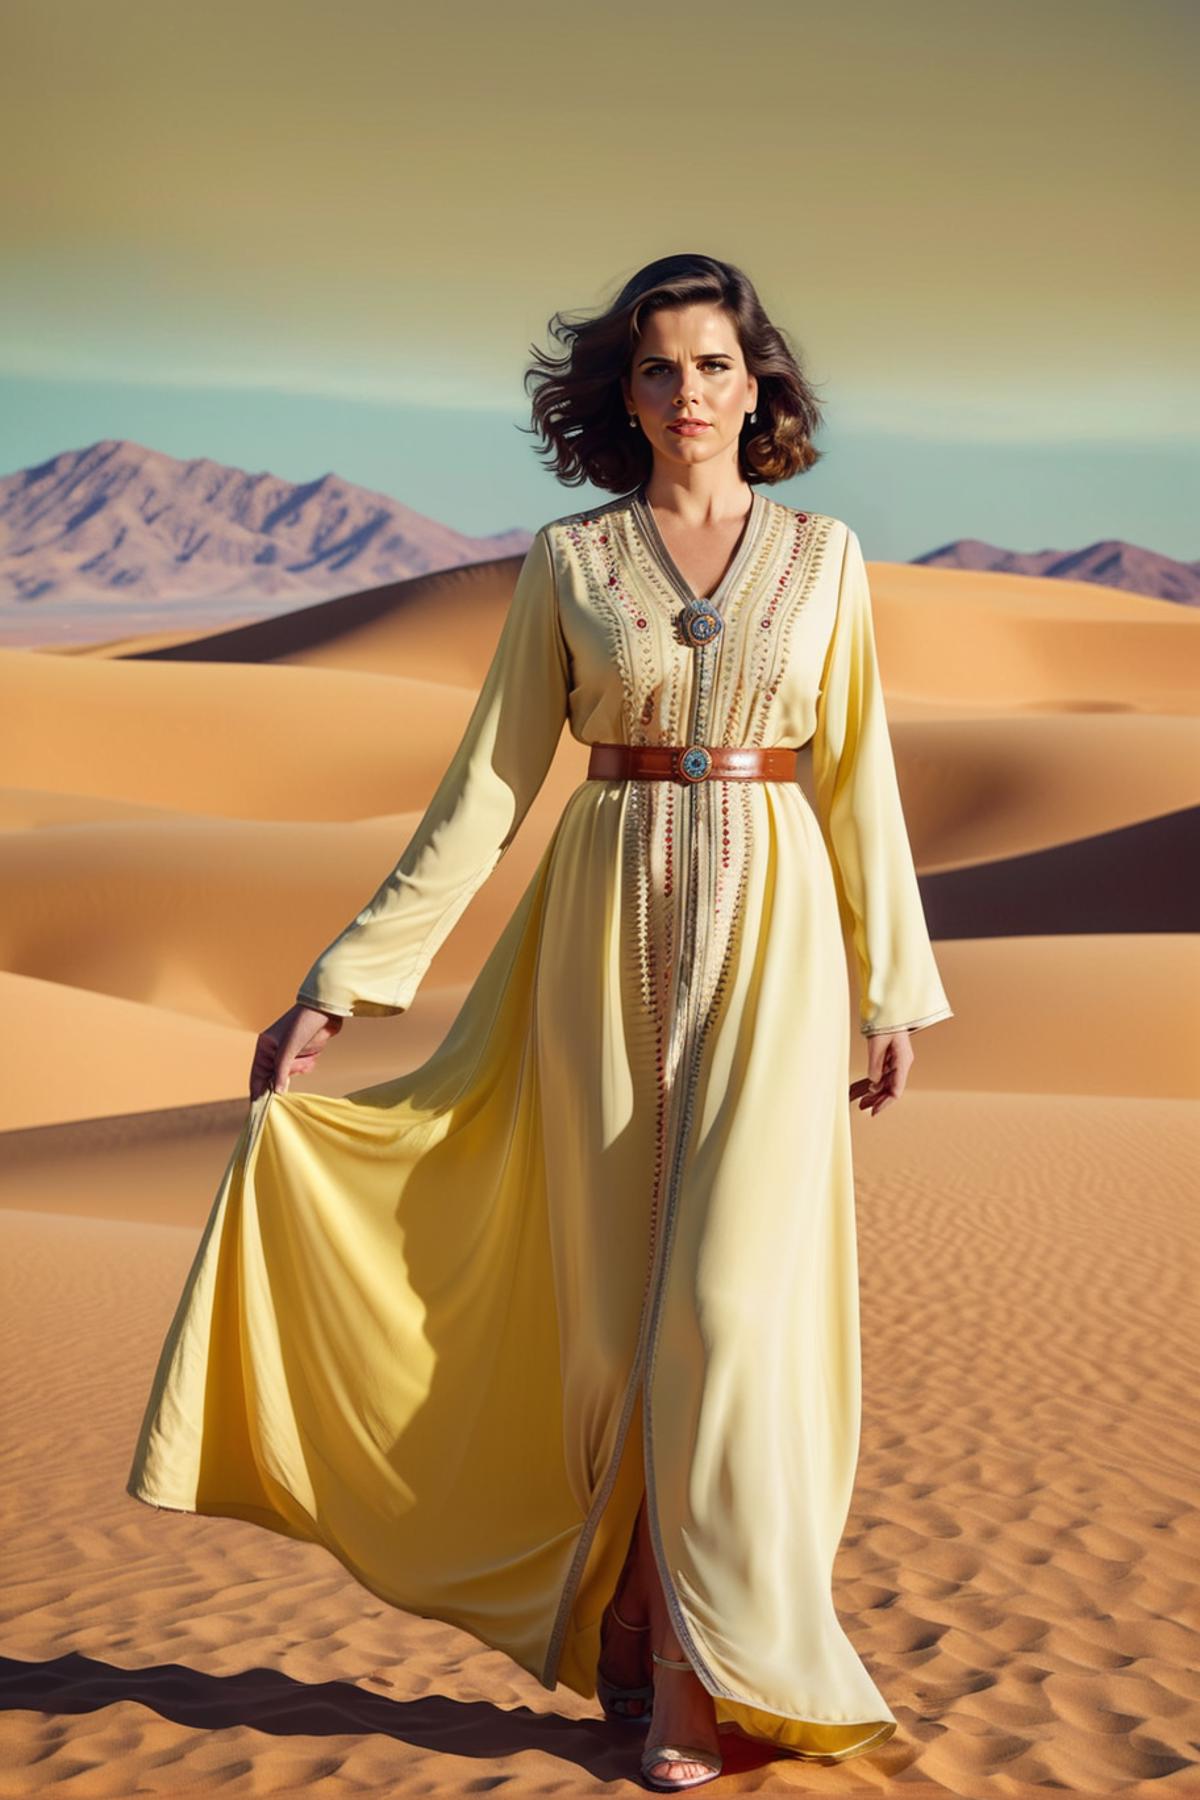 Moroccan Caftan image by AdrarDependant